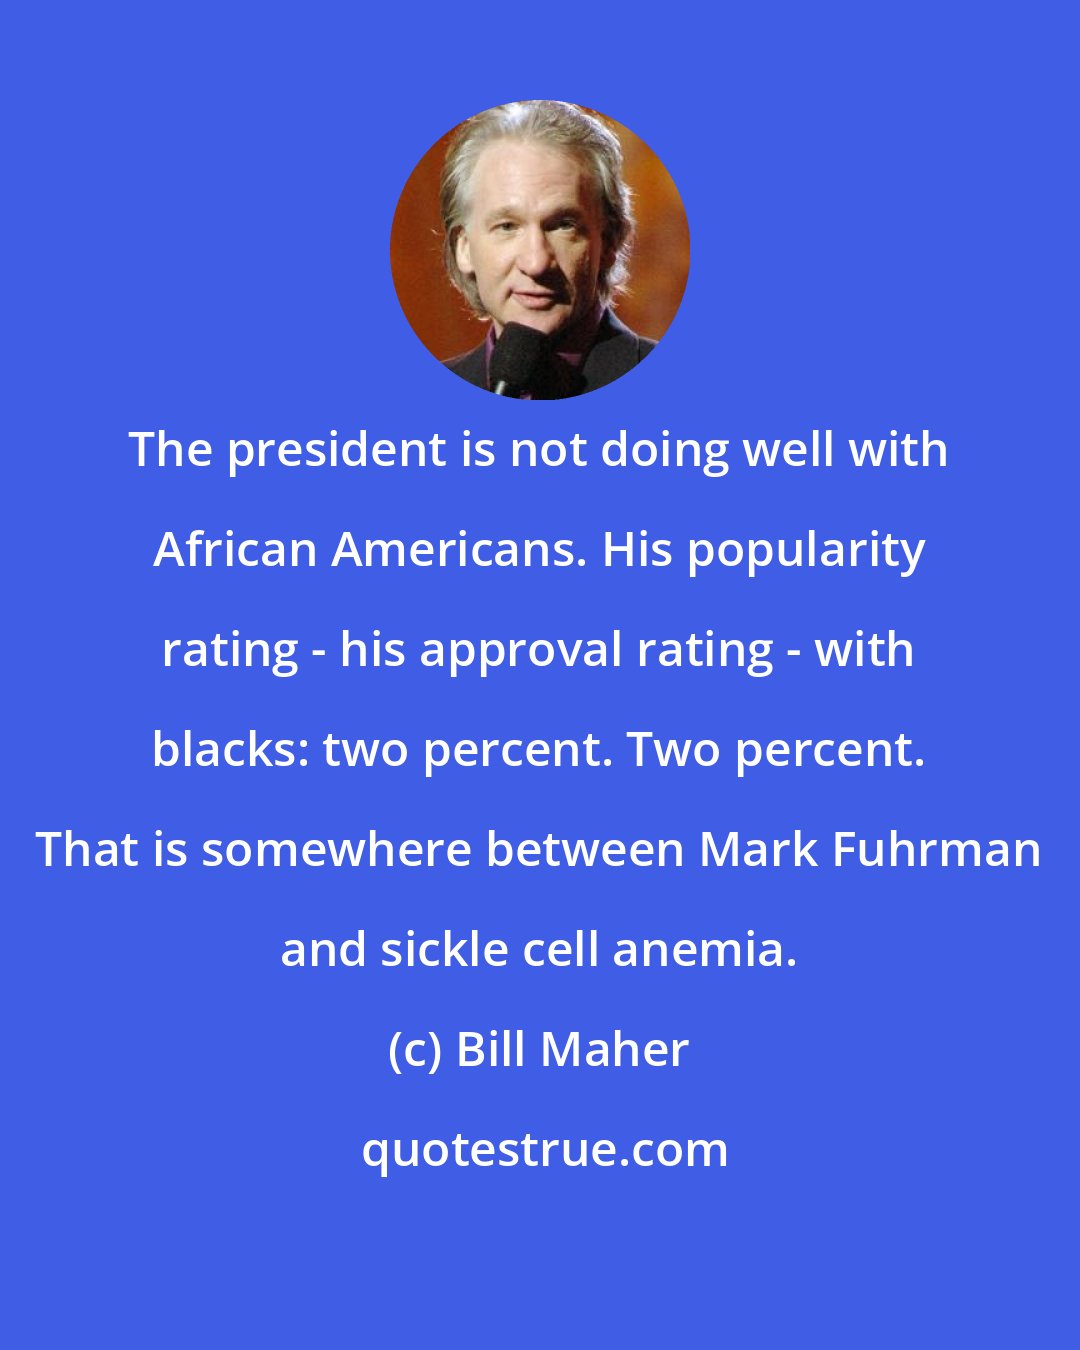 Bill Maher: The president is not doing well with African Americans. His popularity rating - his approval rating - with blacks: two percent. Two percent. That is somewhere between Mark Fuhrman and sickle cell anemia.